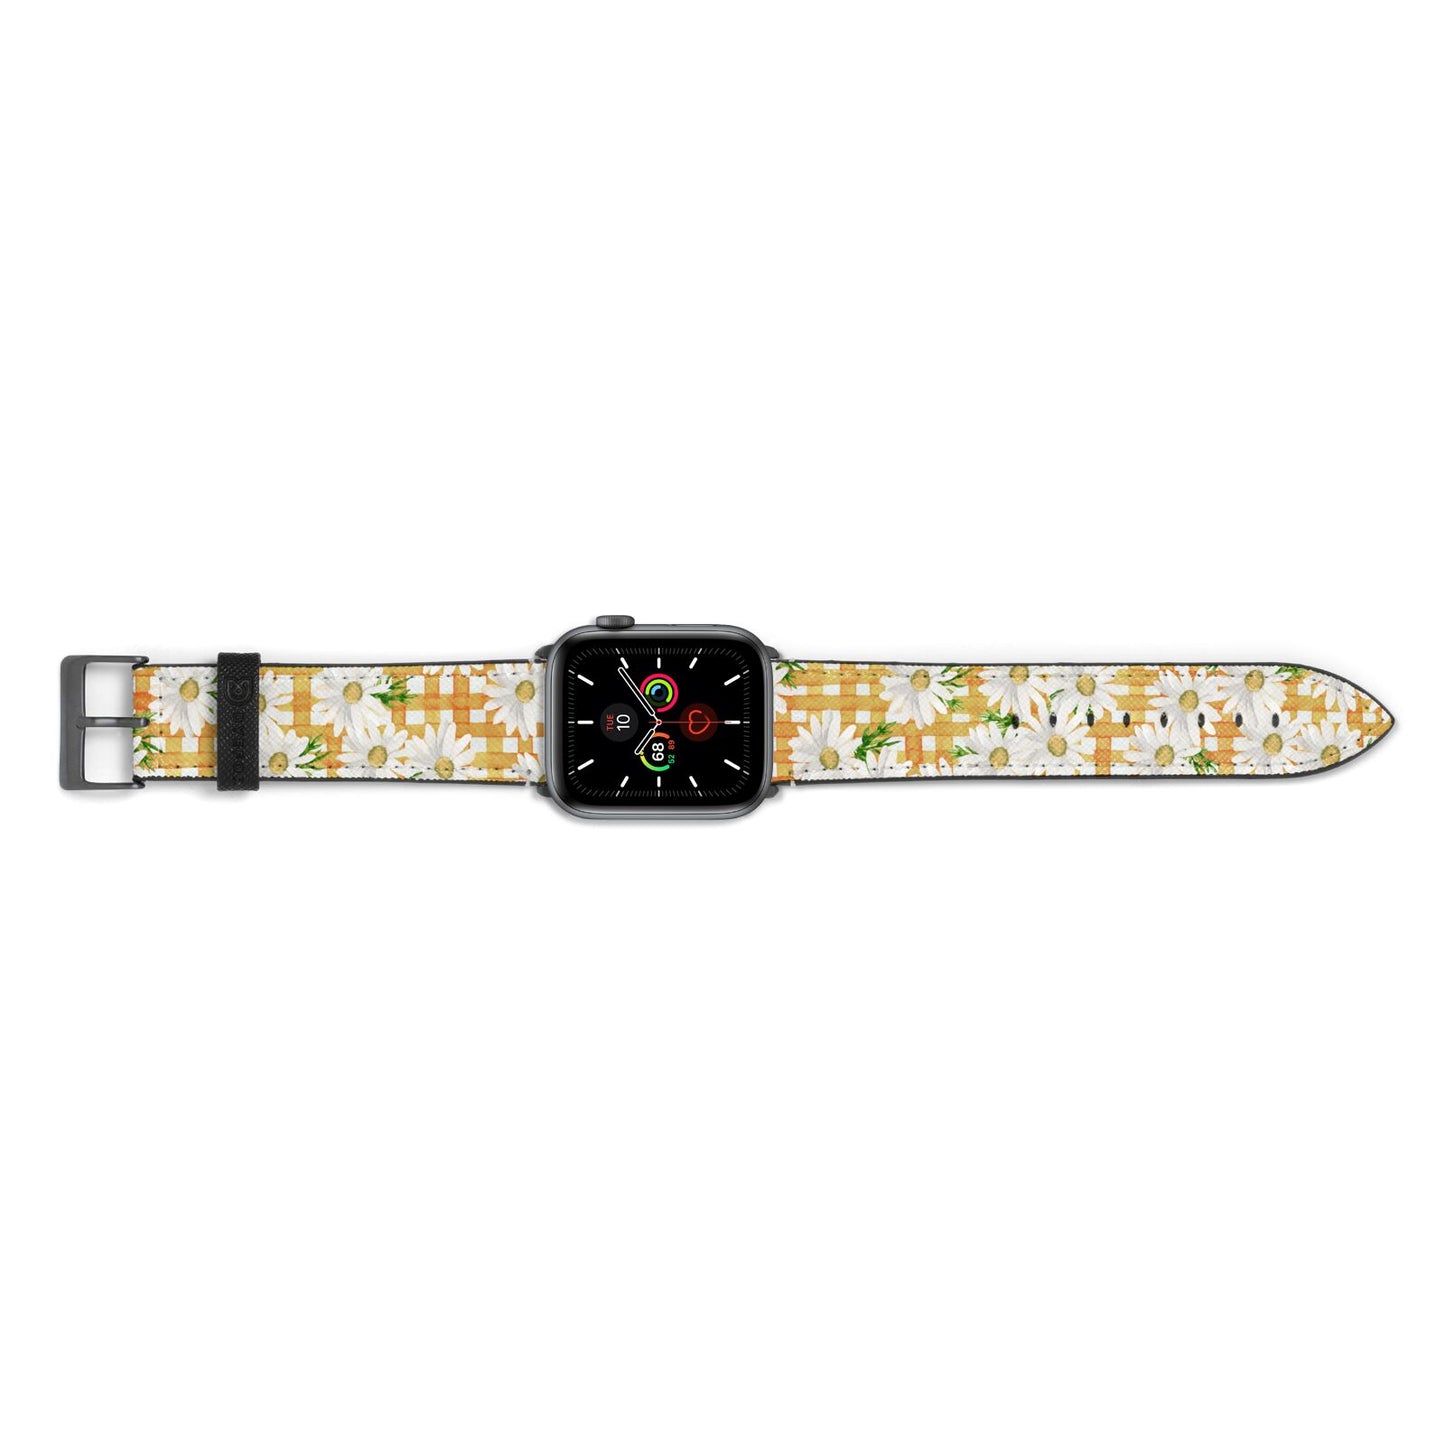 Checkered Daisy Apple Watch Strap Landscape Image Space Grey Hardware